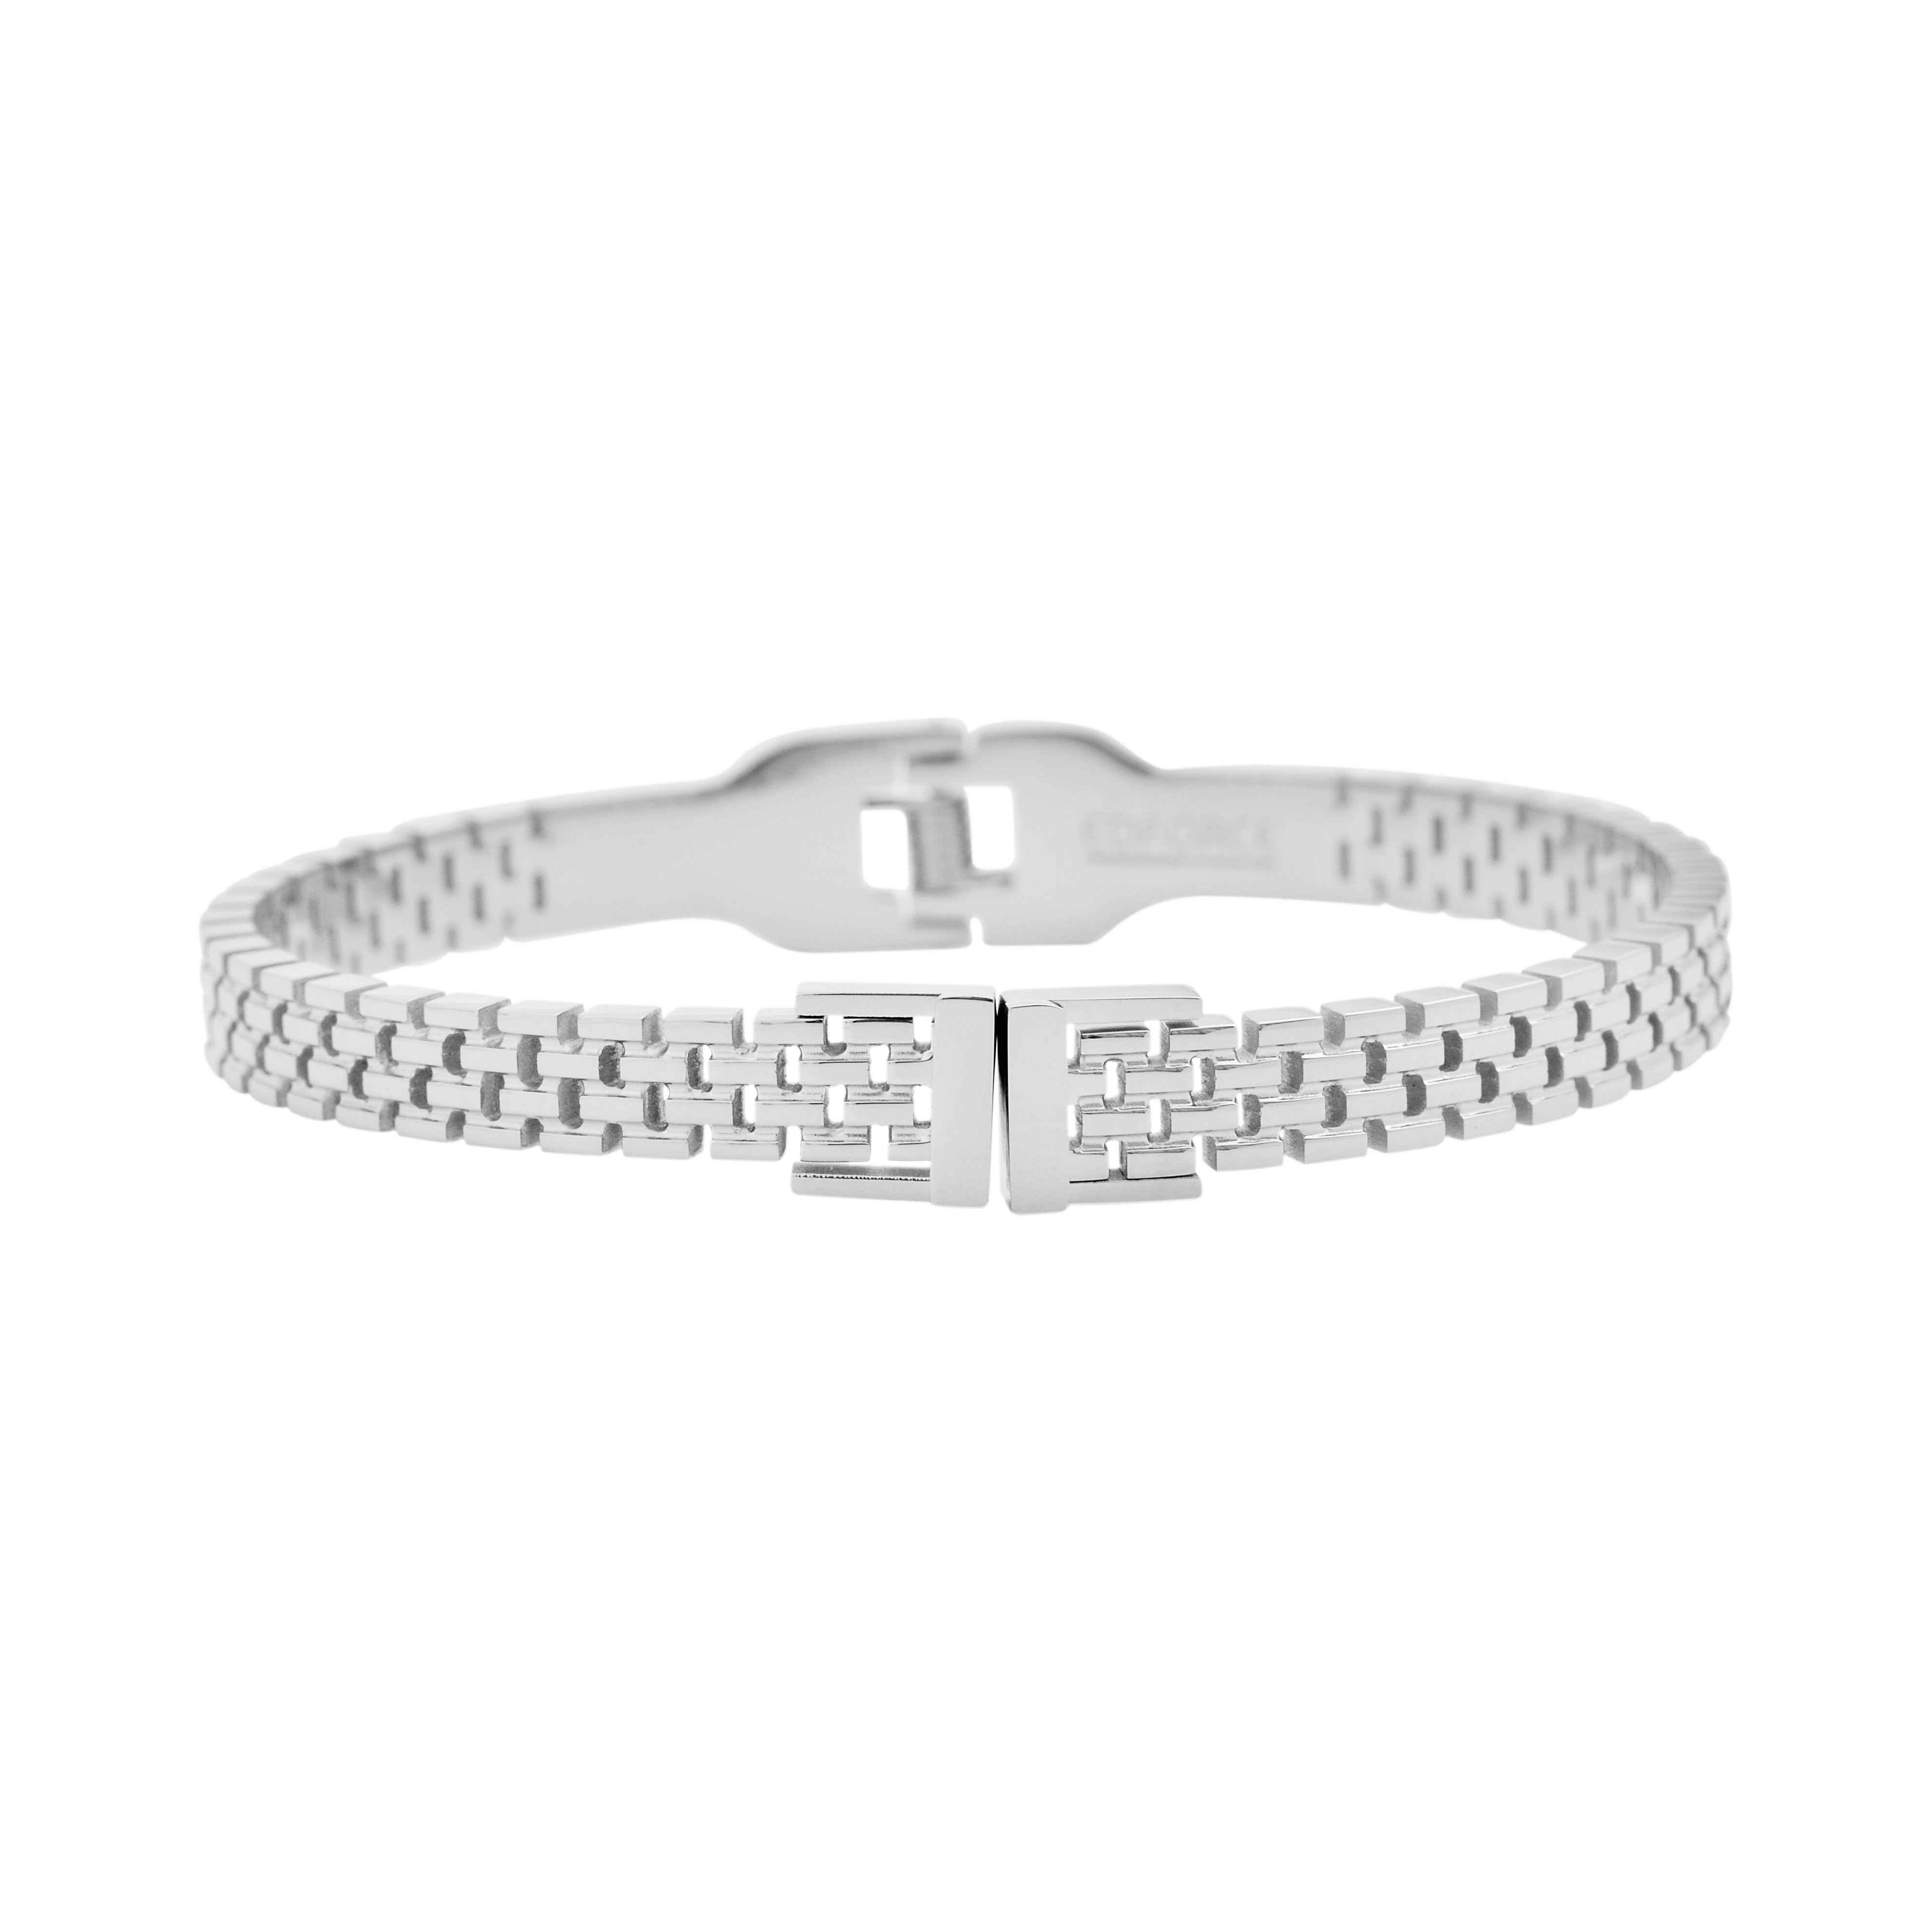 Stainless Steel Silver Tone Bangle